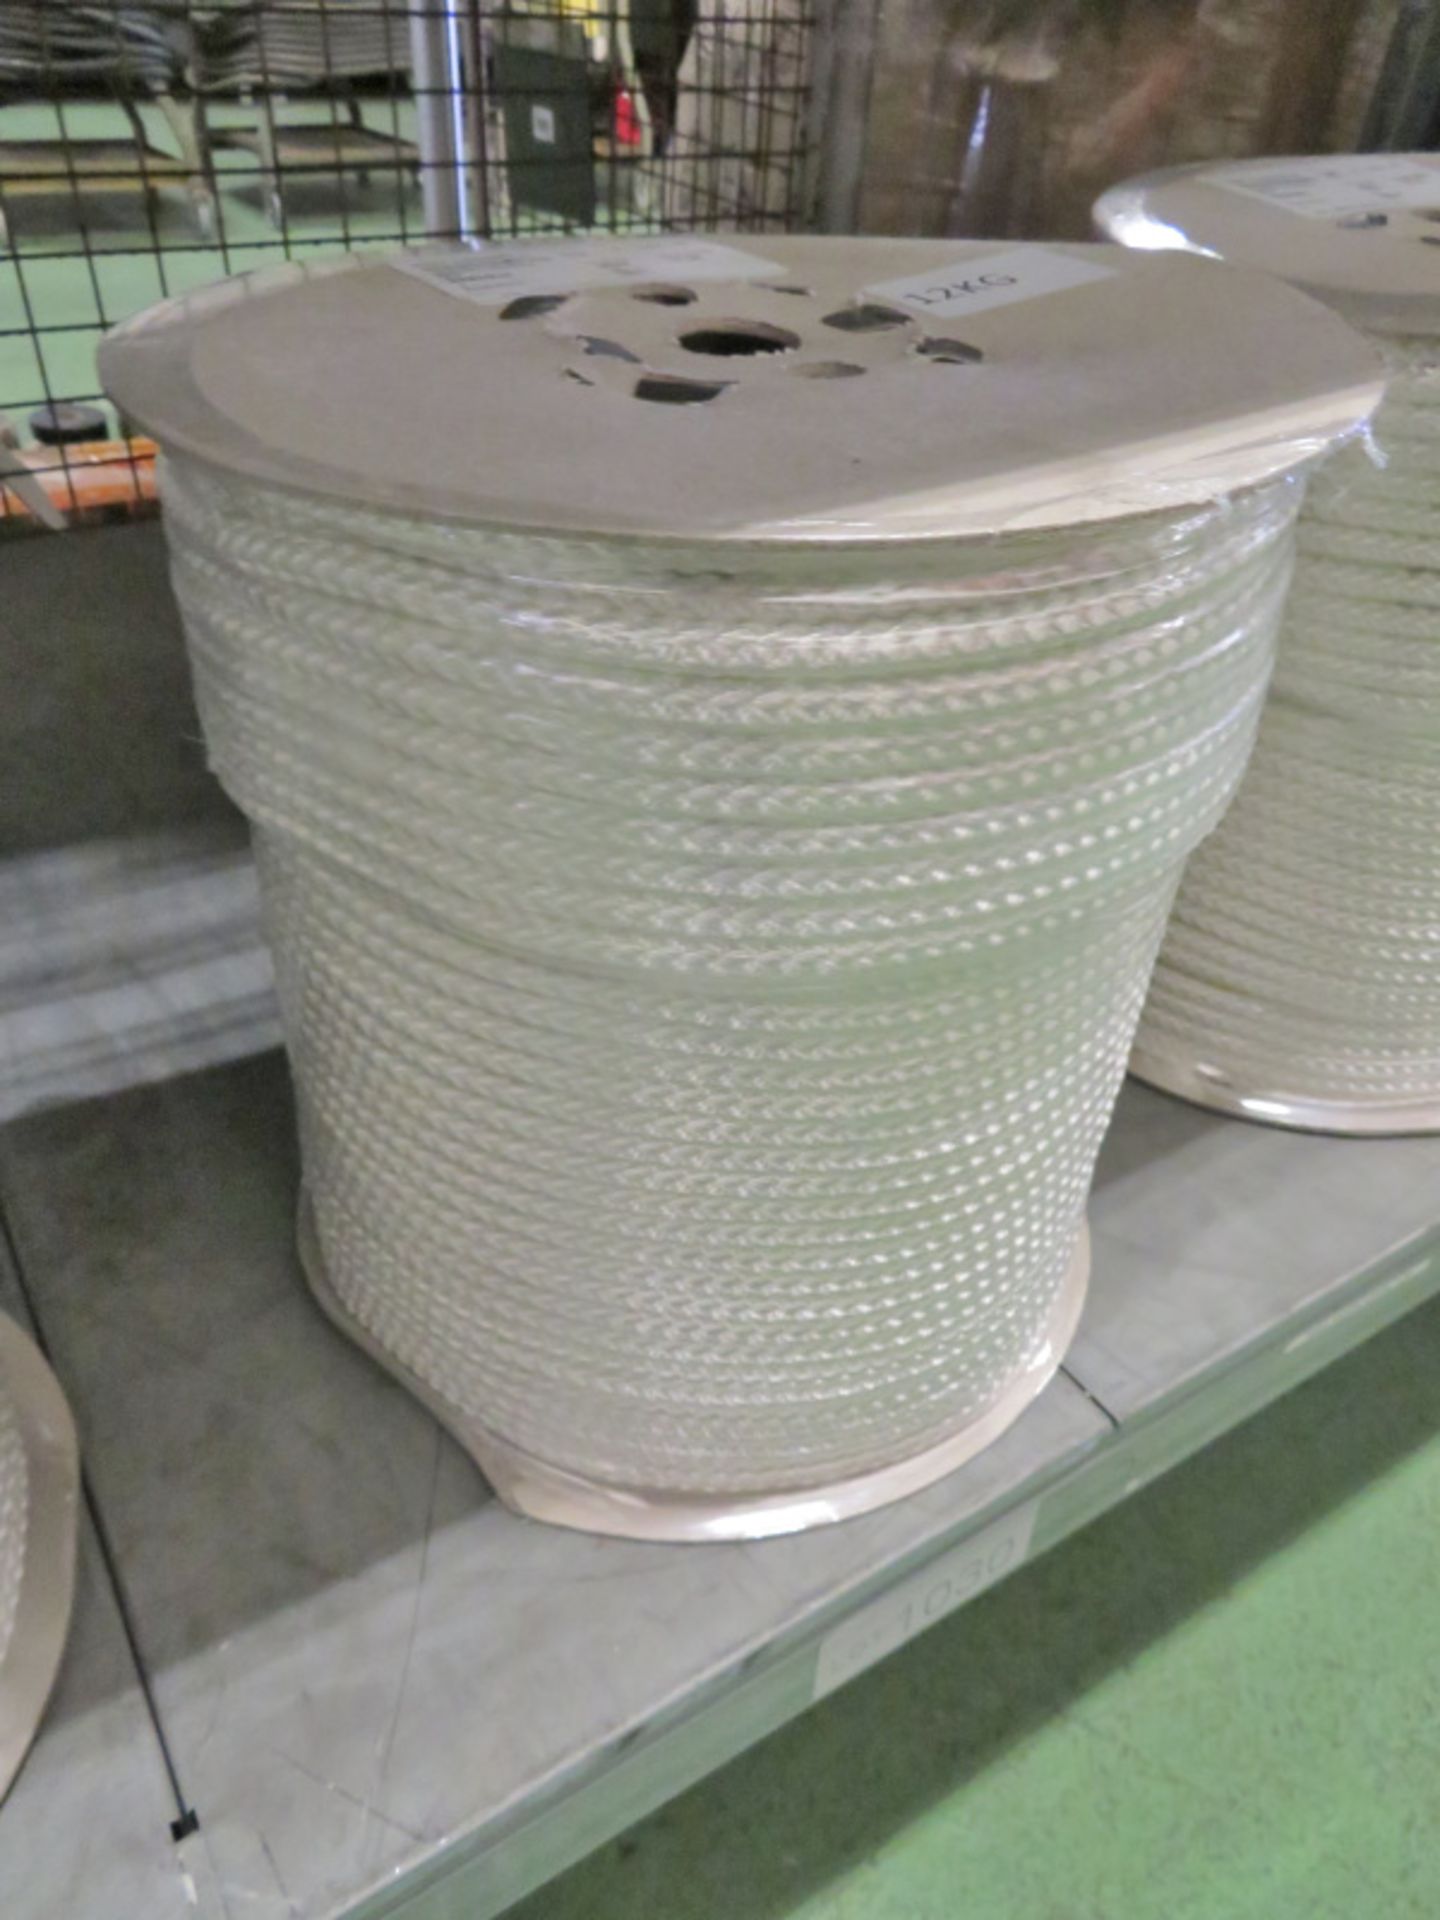 Fibrous rope 22 - 12kg each coil - NSN 4020-99-120-8692